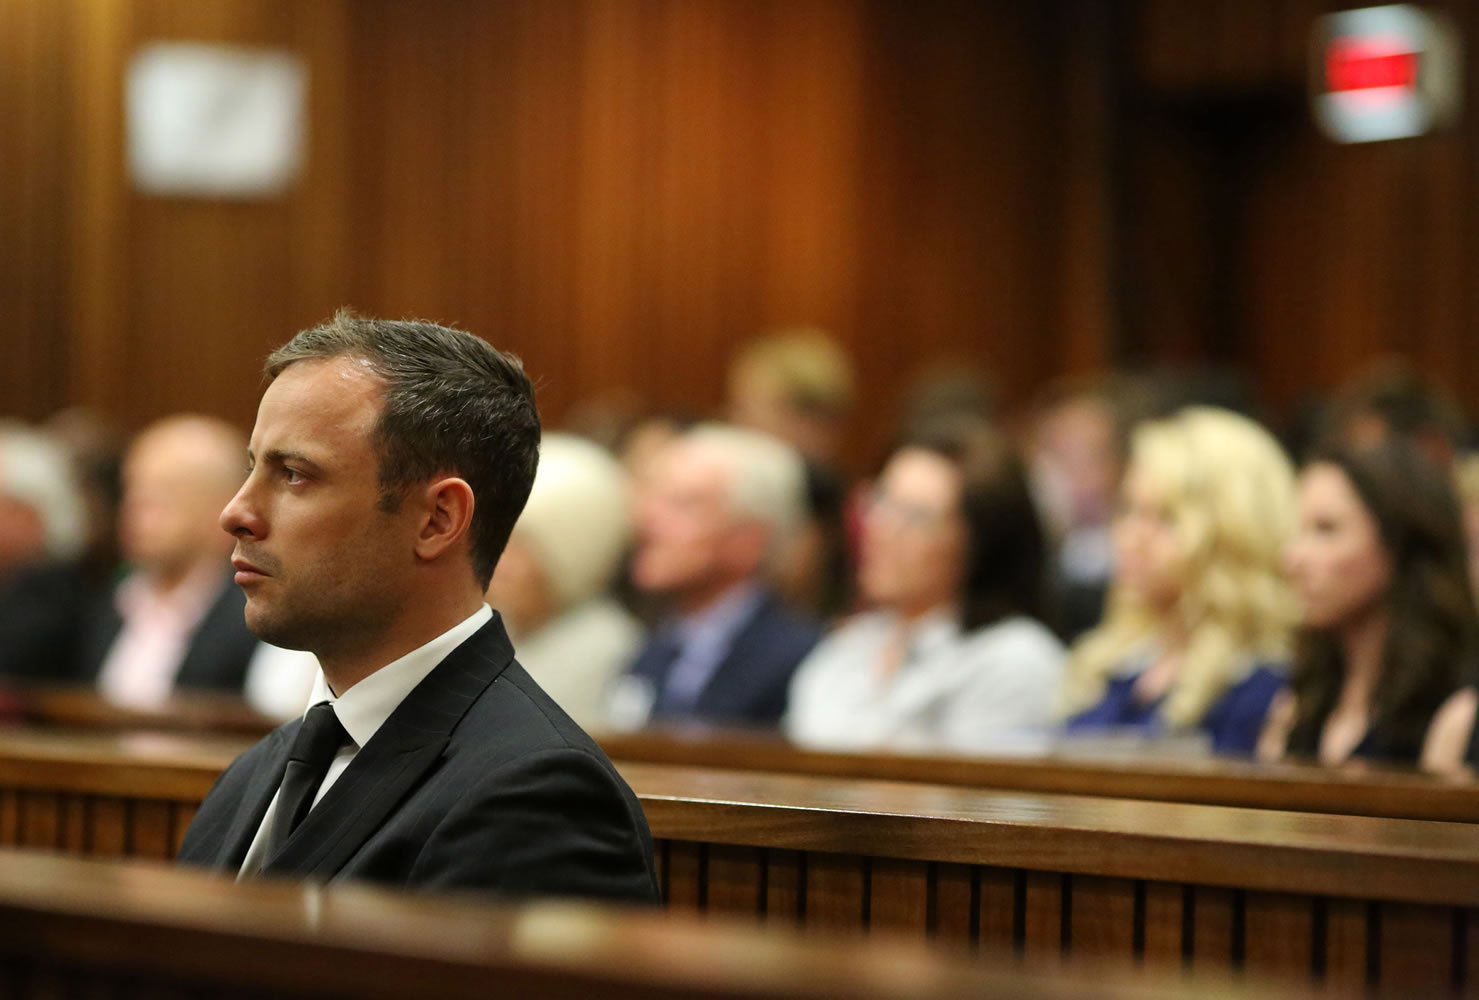 Oscar Pistorius sits in the dock looking in court in Pretoria, South Africa on Friday, Sept. 12. Judge Thokozile Masipa found Pistorius guilty of culpable homicide for the shooting death of his girlfriend Reeva Steenkamp. Sentencing procedures will start Oct.